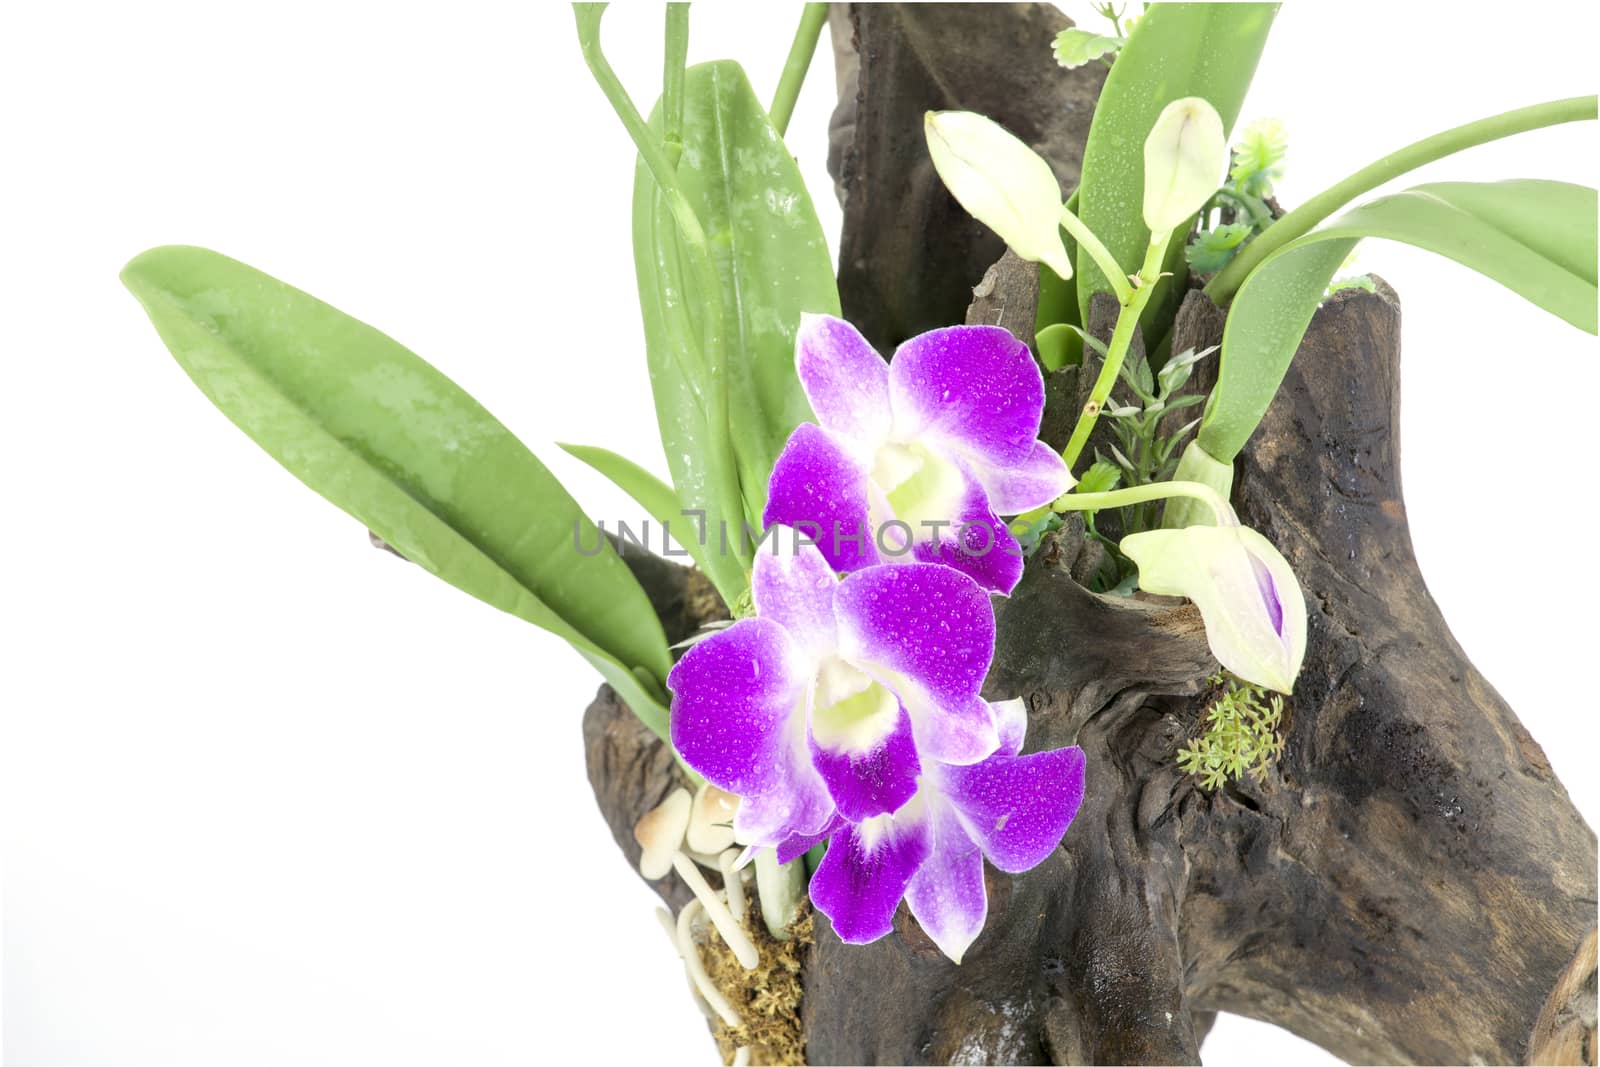 Purple Orchid and leaves on an old tree stump isolate on white background.